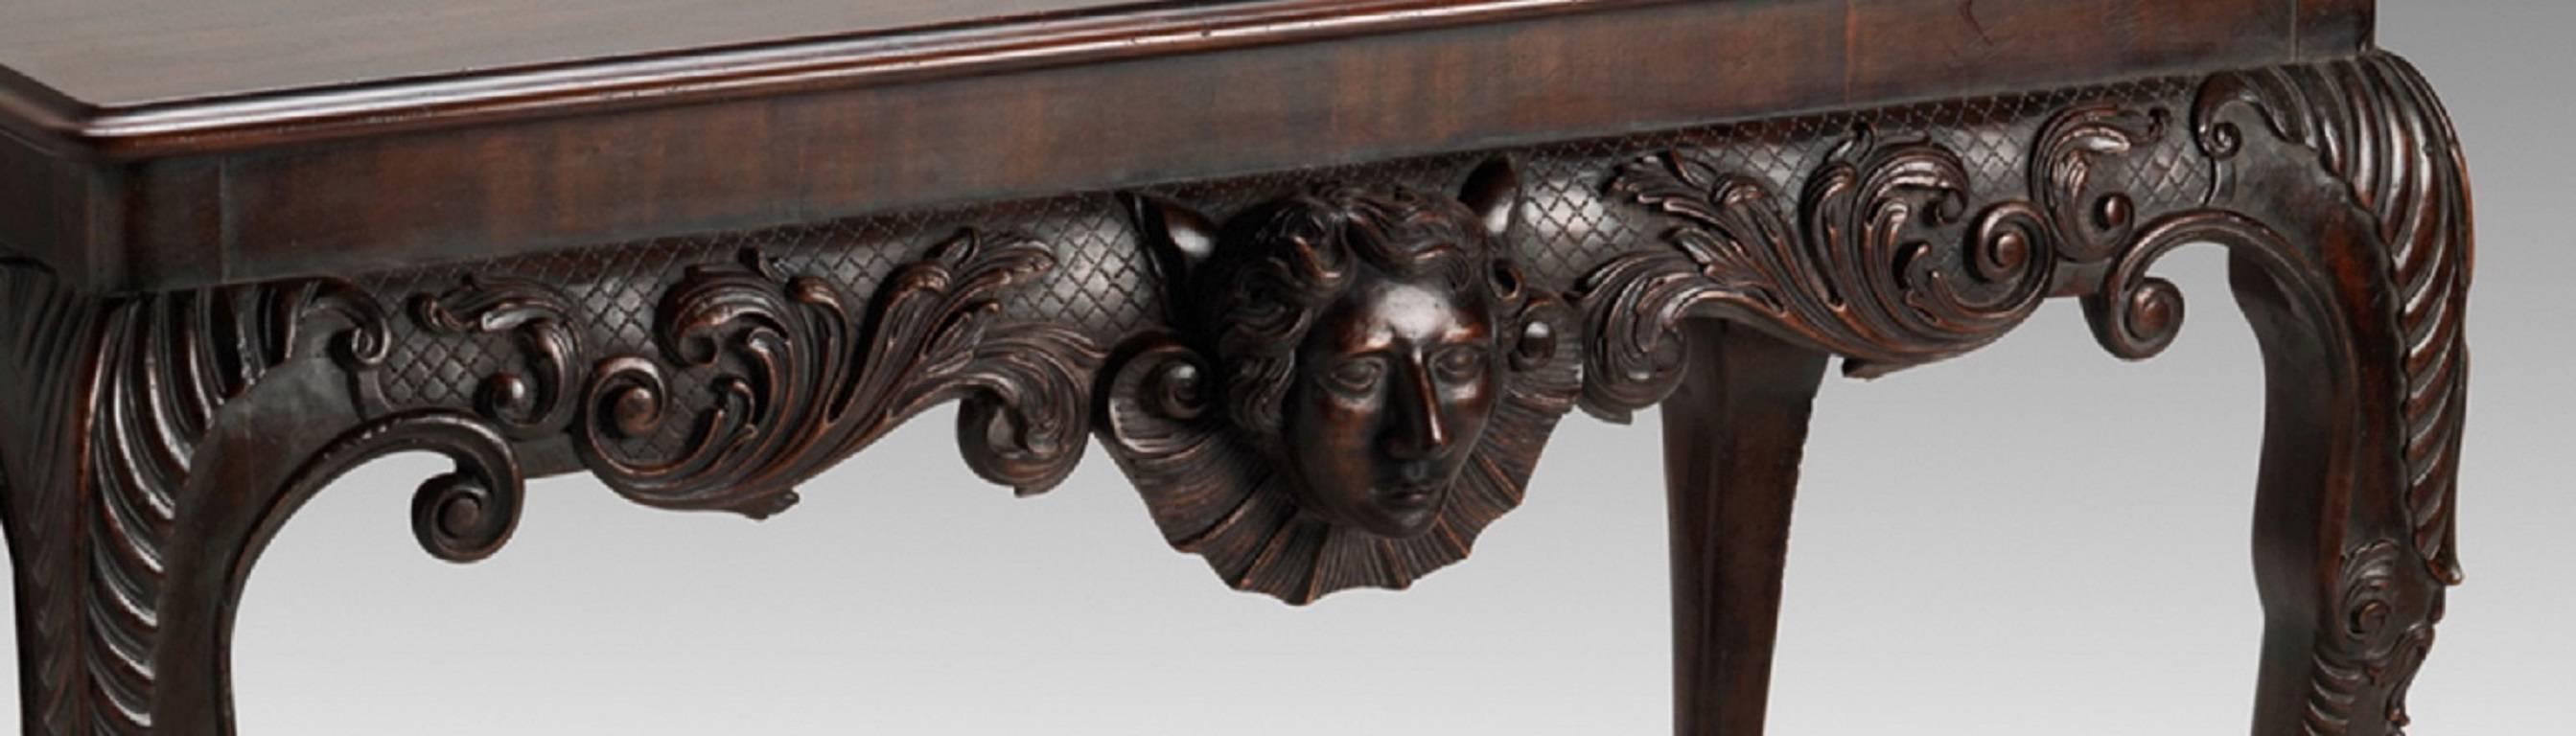 Hand-Carved Irish Pixie Mask Table For Sale